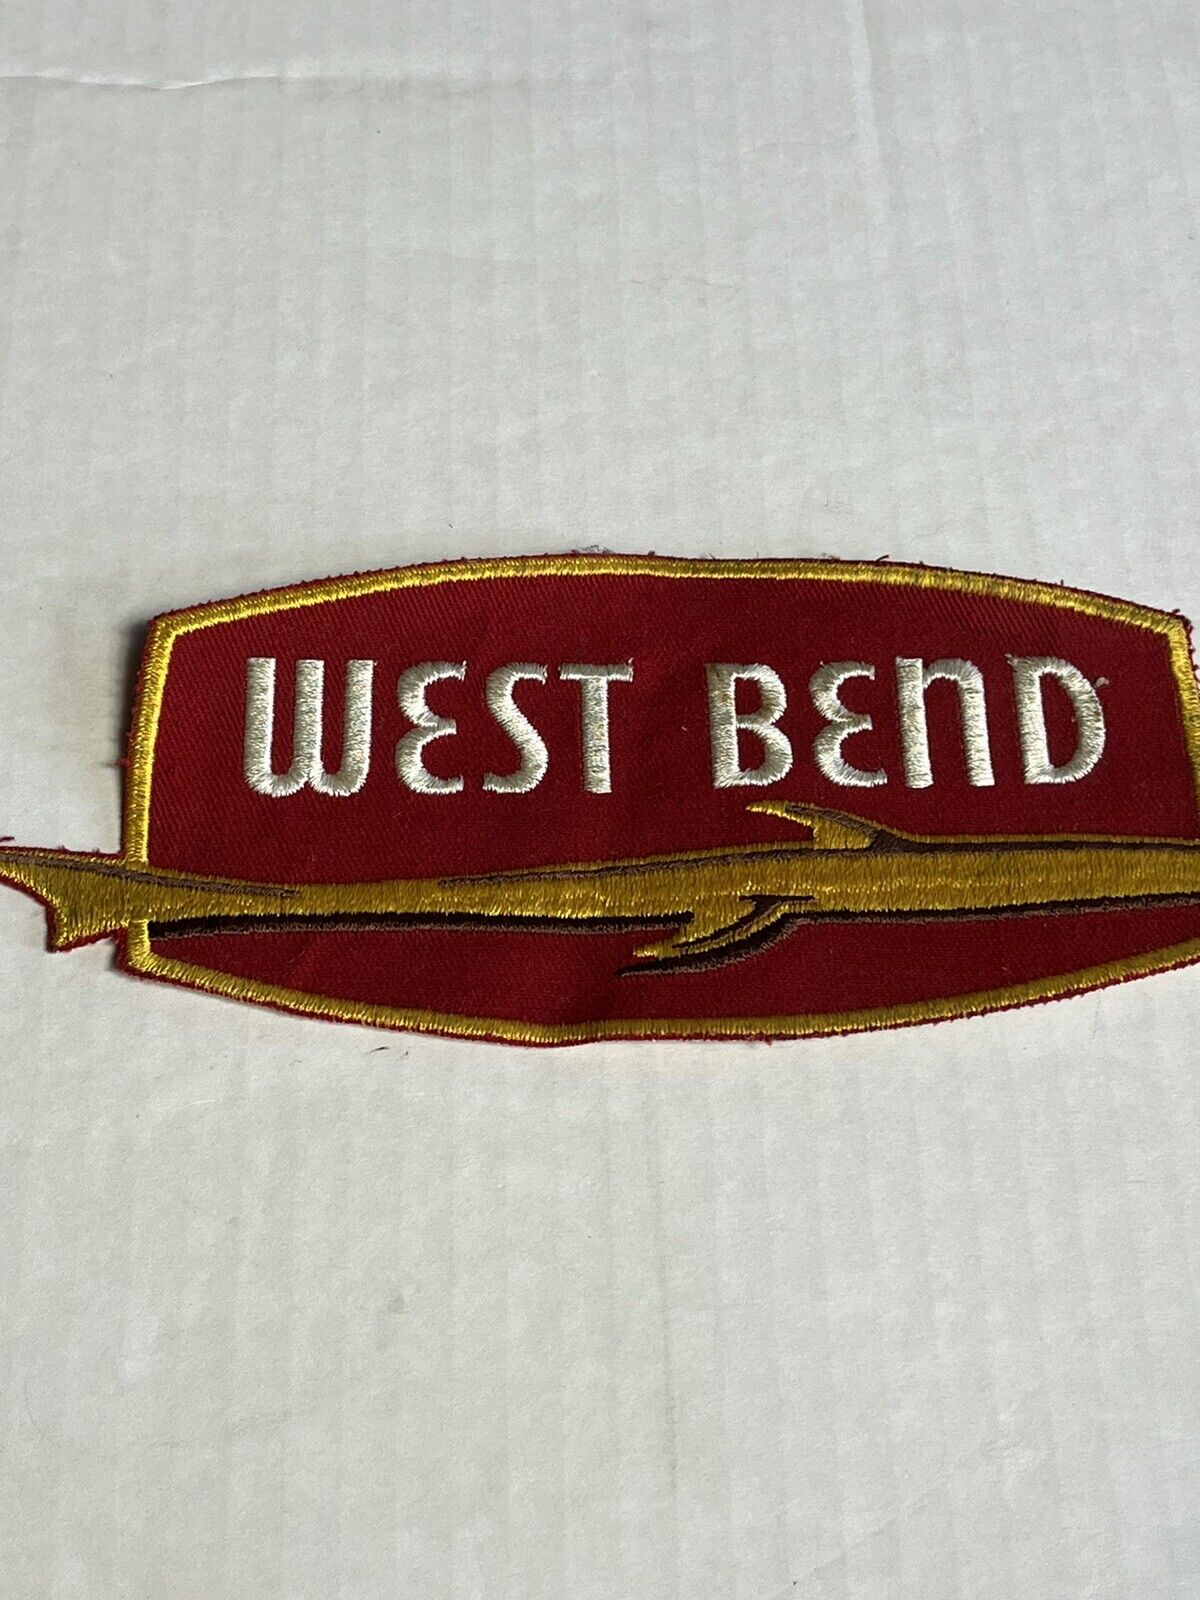 Vintage West Bend Patch Fish Embroidered